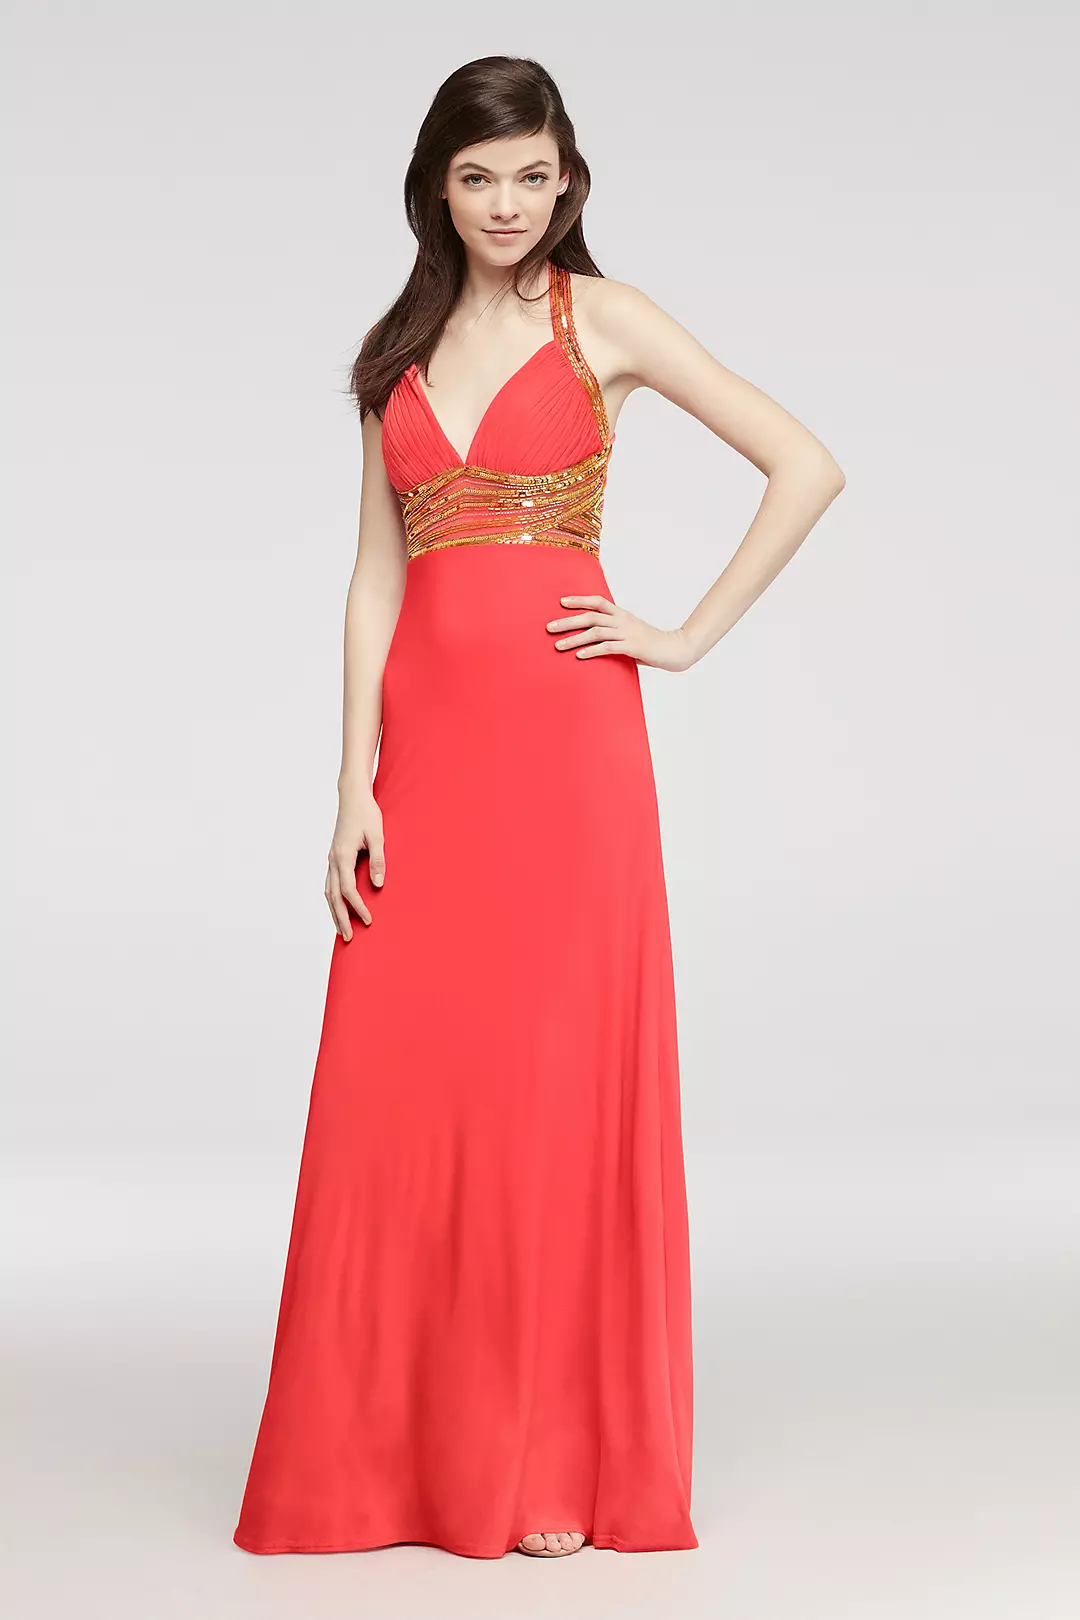 Beaded Halter Jersey Prom Dress with Open Back  Image